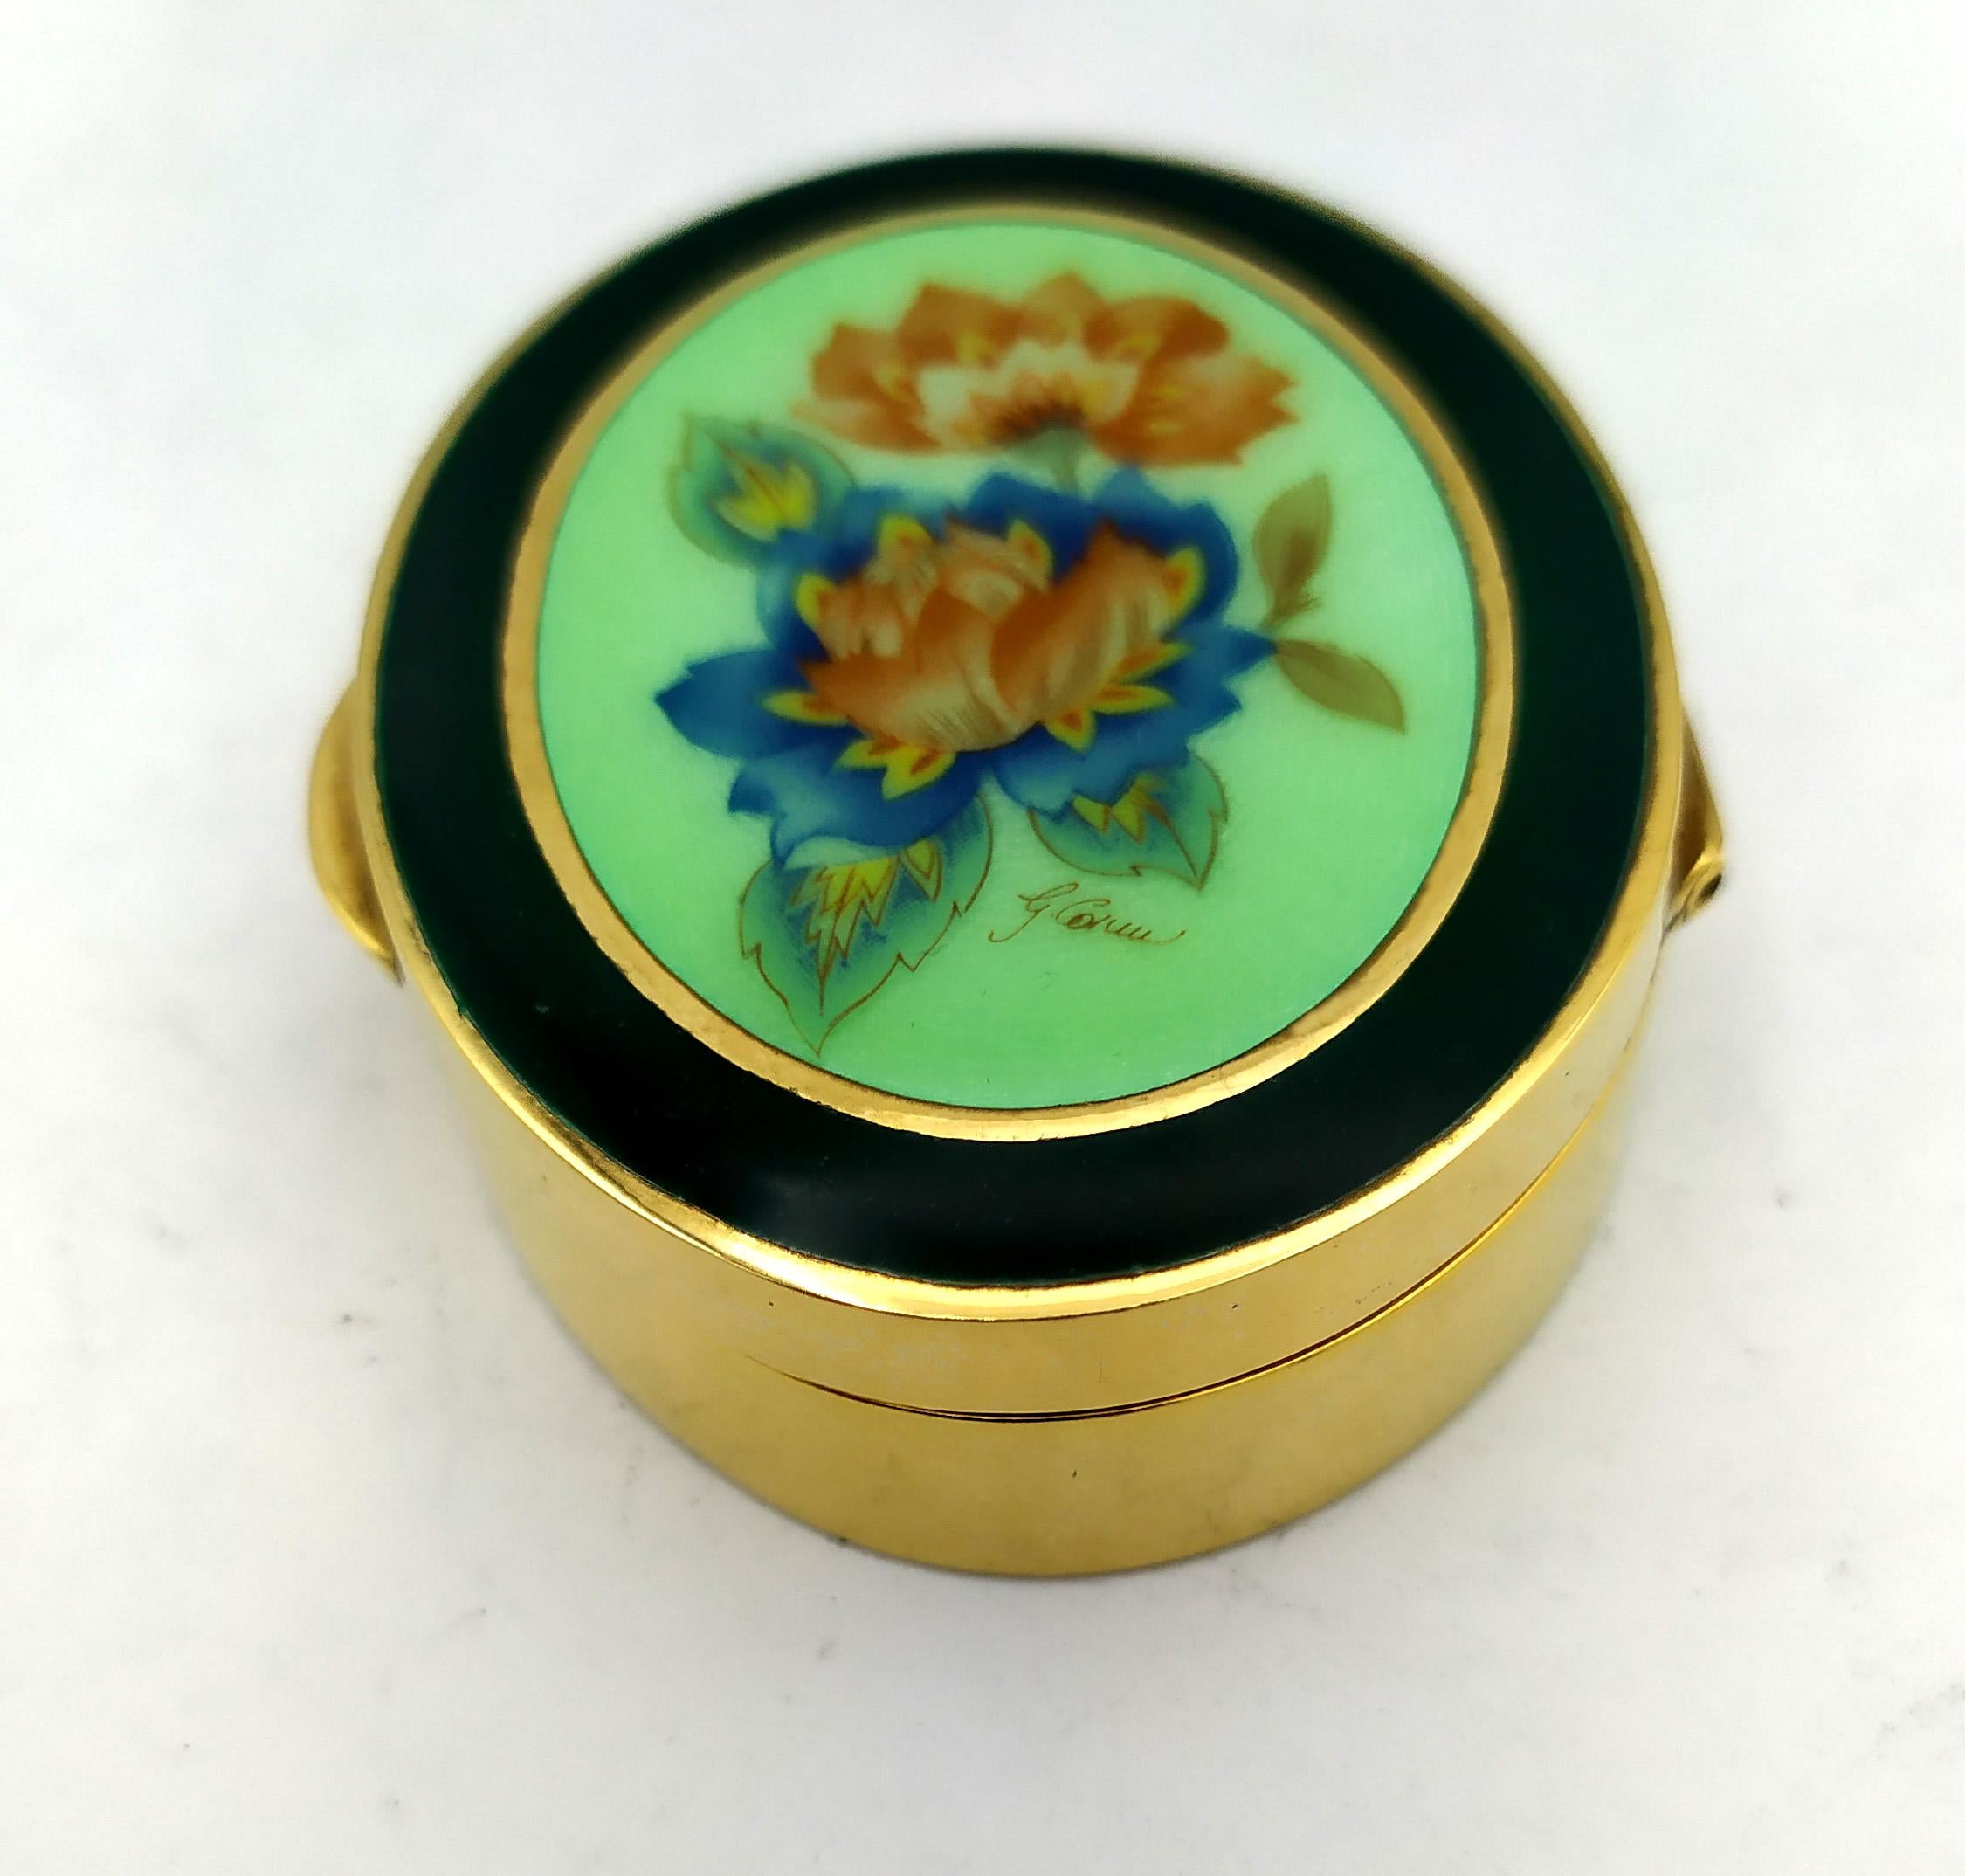 Pill Box oval with floral miniature Art Nouveau style Sterling Silver Salimbeni  in 925/1000 sterling silver gold plated with hand-painted fire-enamelled floral miniature in Art Nouveau style. Dimensions cm. 5 x 7 x 1.5. Weight gr. 82. Designed by